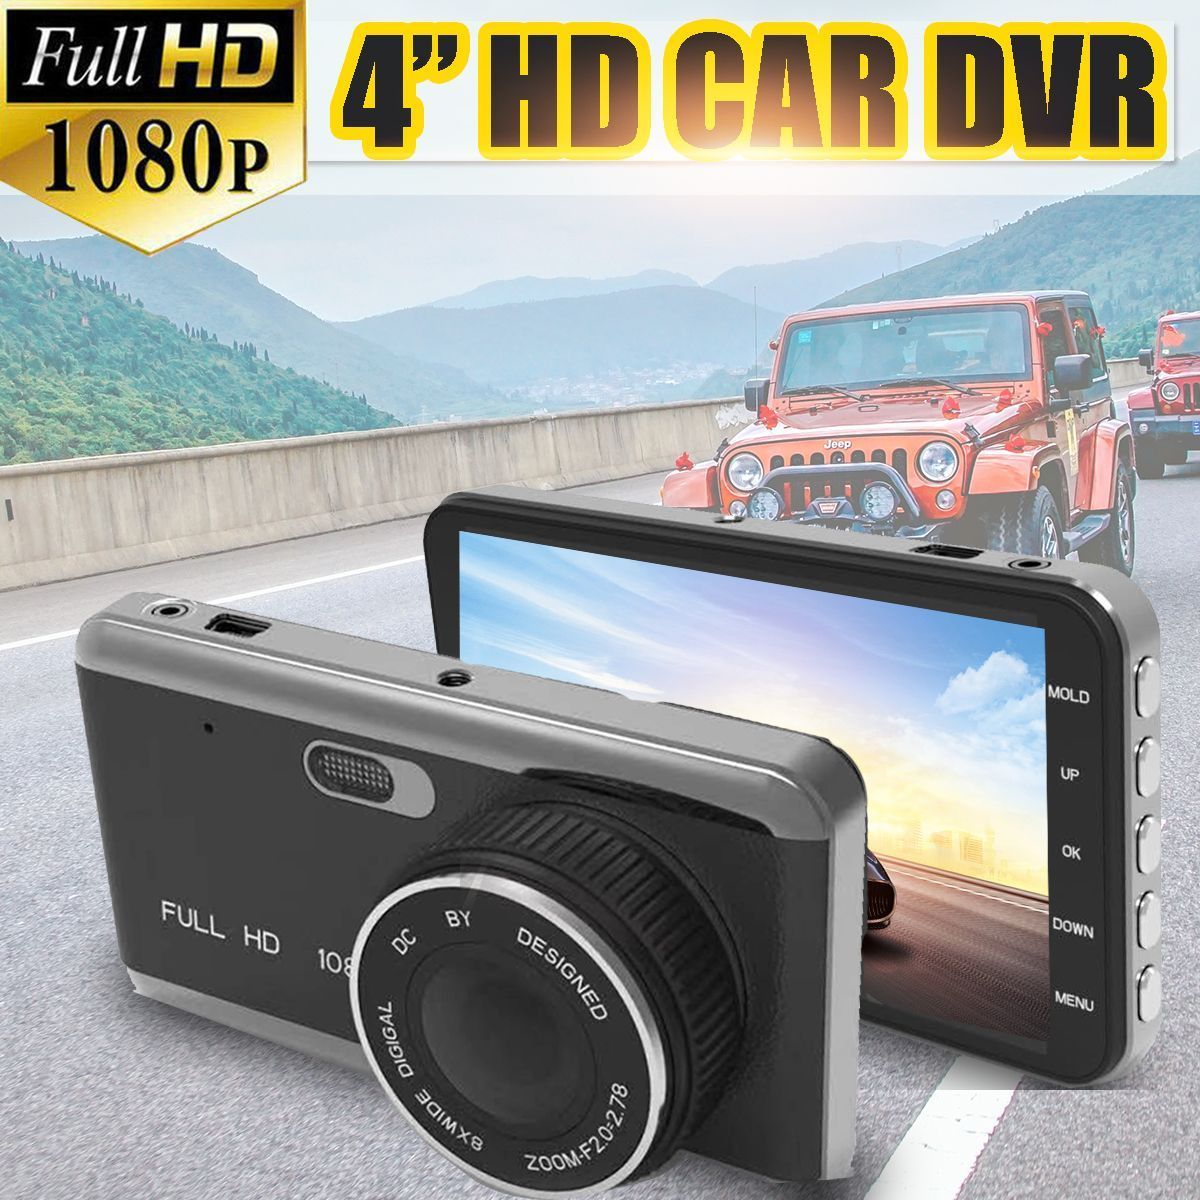 GT30-4-inch-1080P-Dual-Lens-Parking-Monitoring-170-Degree-Wide-Car-DVR-with-Rear-Camera-Recording-Dr-1532663